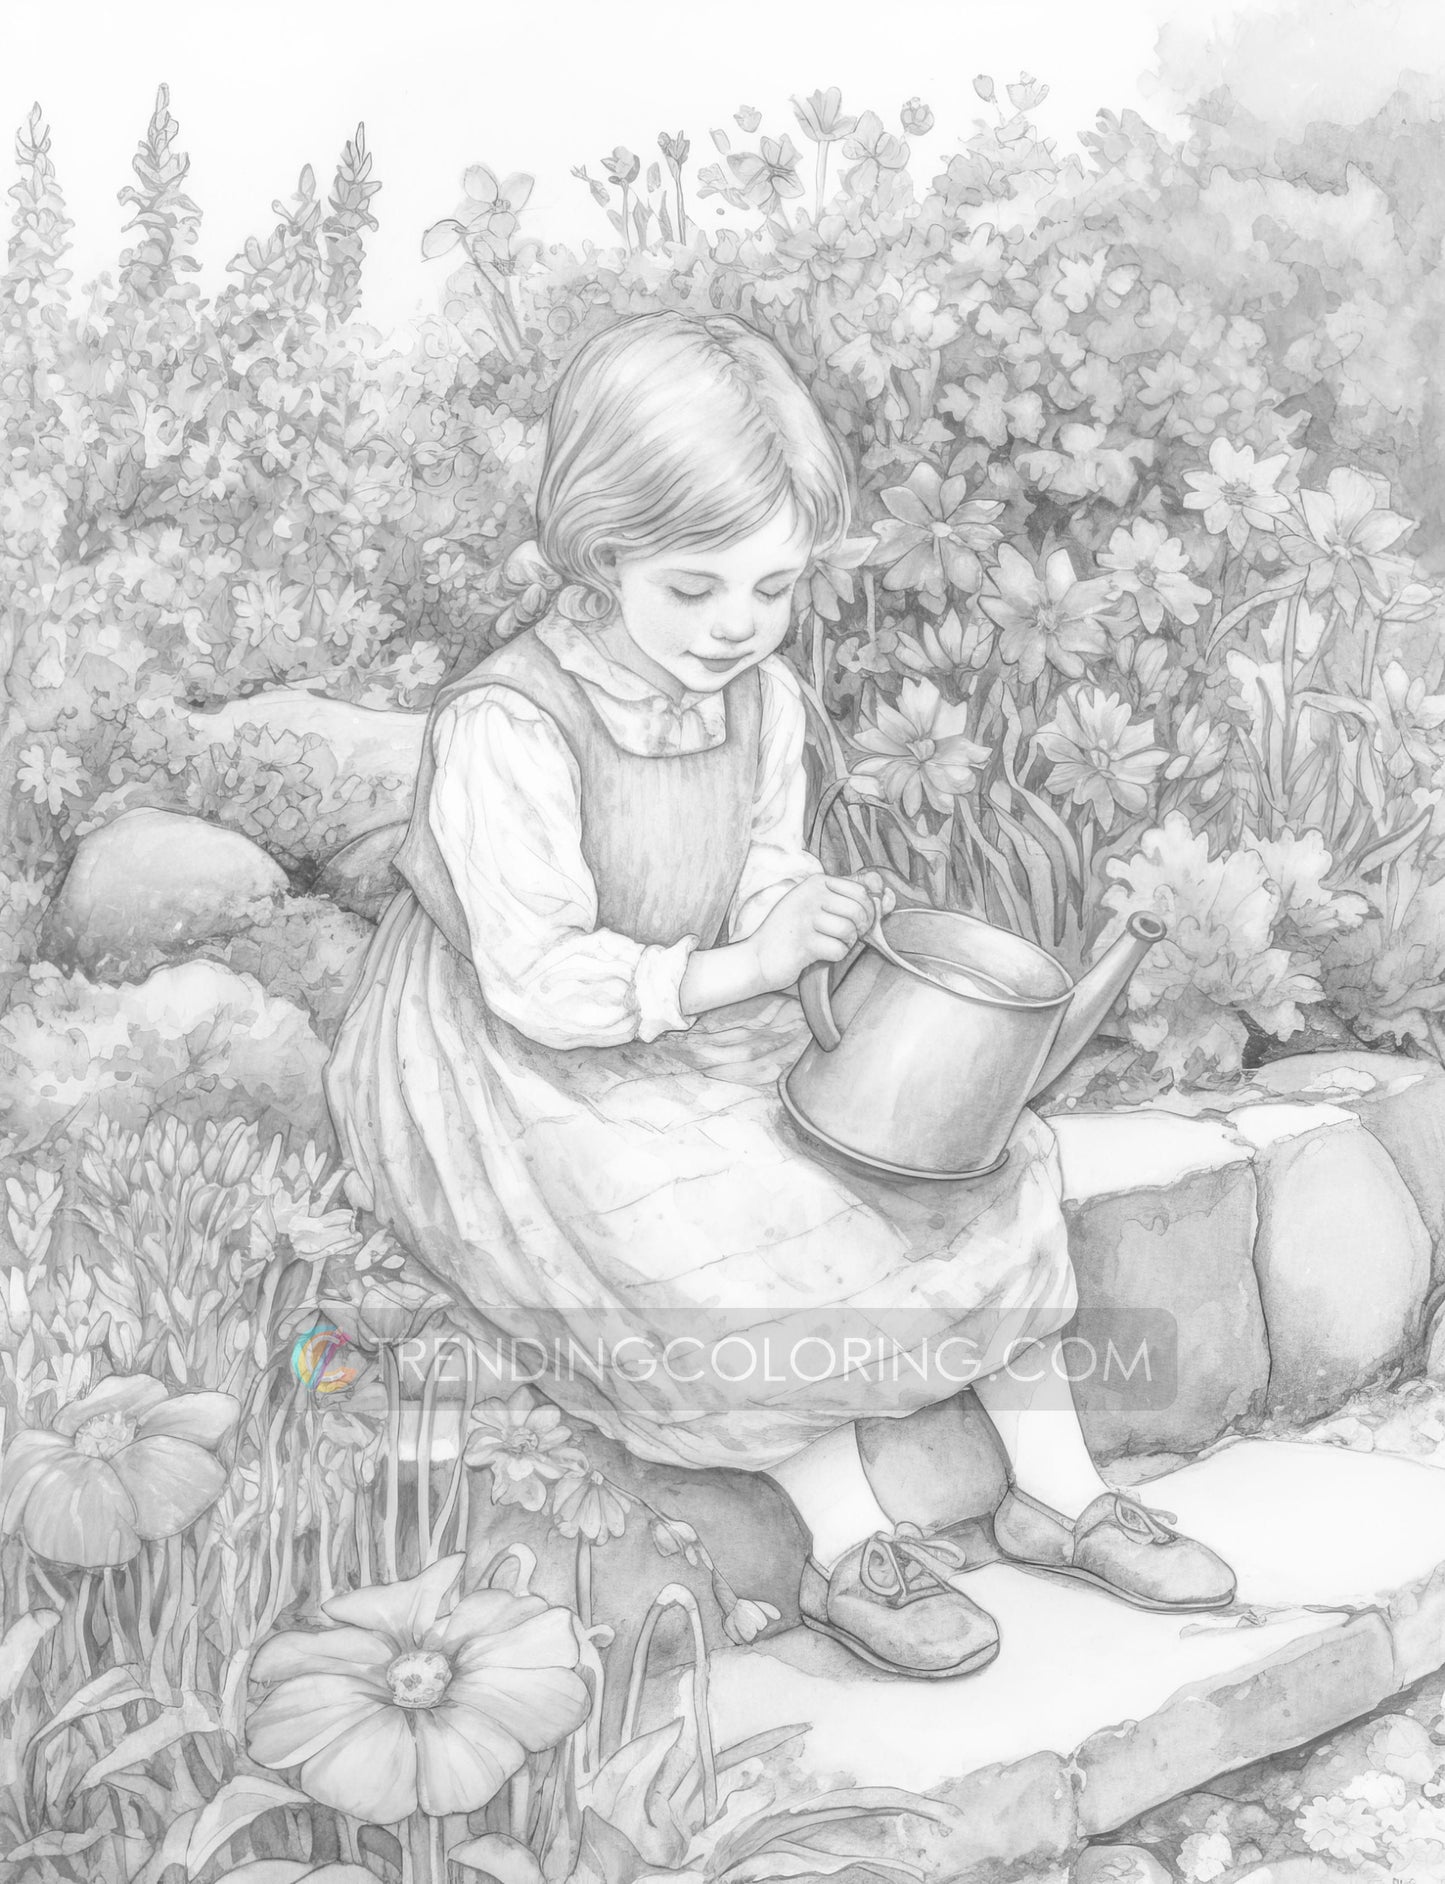 25 Little Girl In Garden Grayscale Coloring Pages - Instant Download - Printable PDF Dark/Light